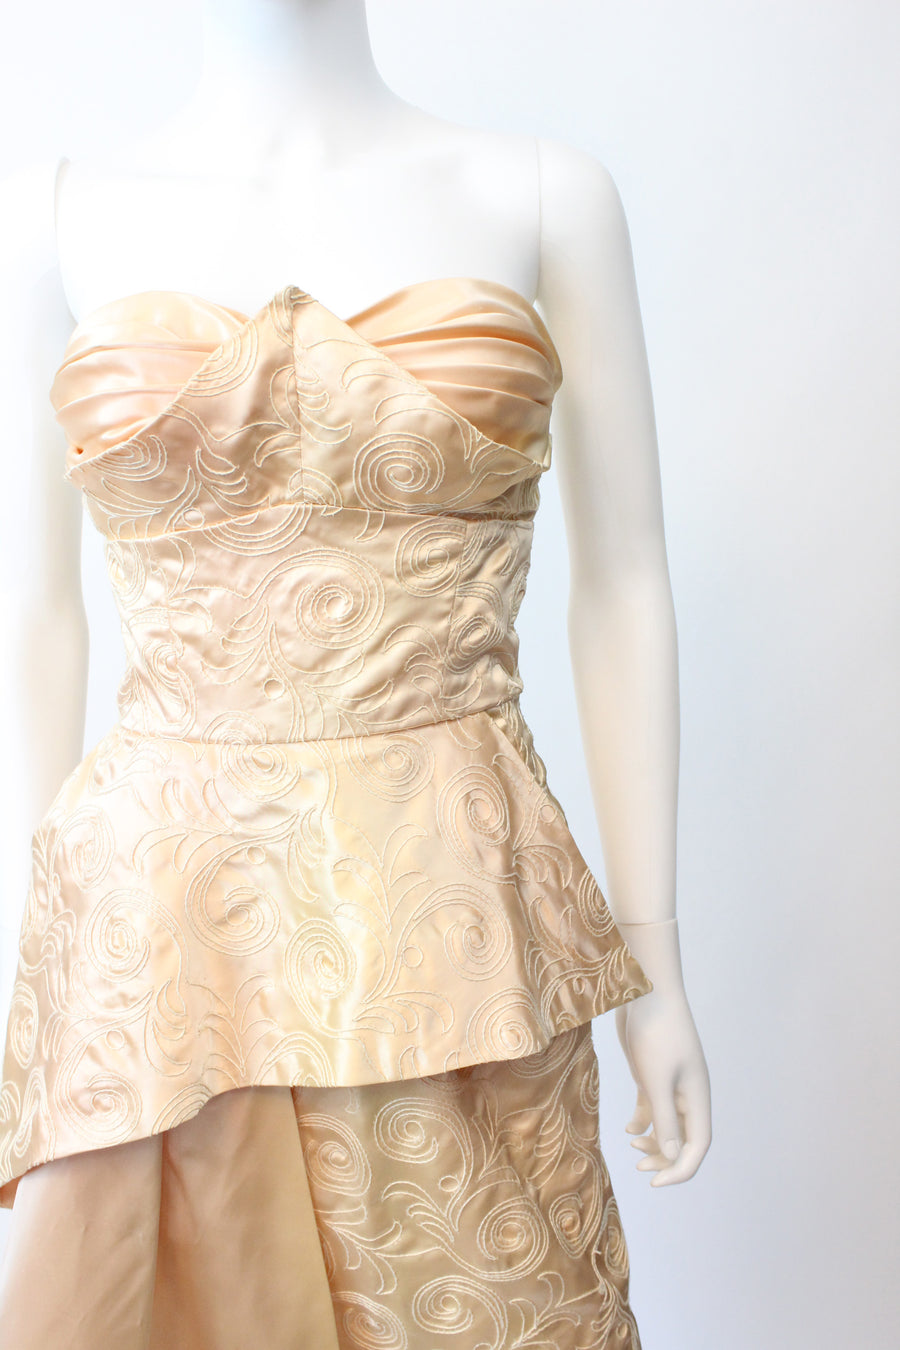 1950s strapless nude cocktail dress xs | new fall